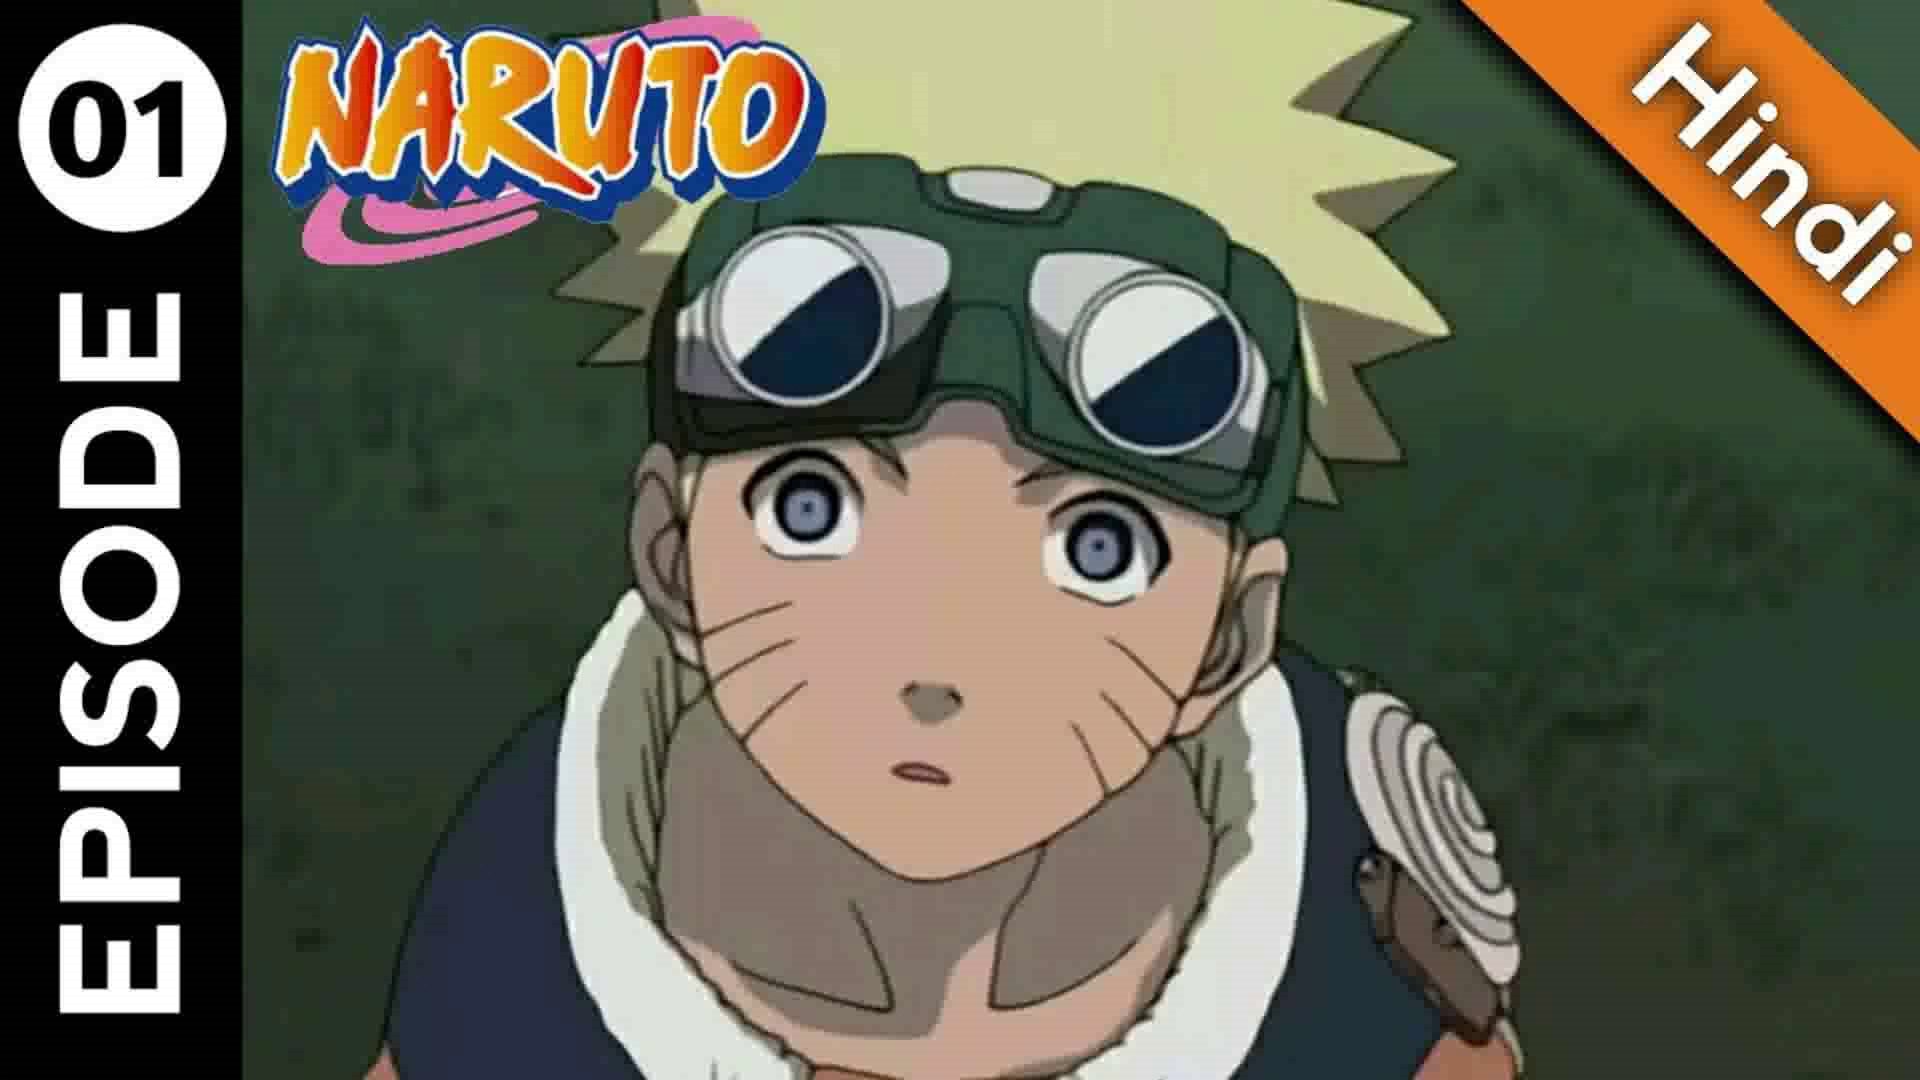 Naruto episodes in hindi explanation by JTN anime - Dailymotion